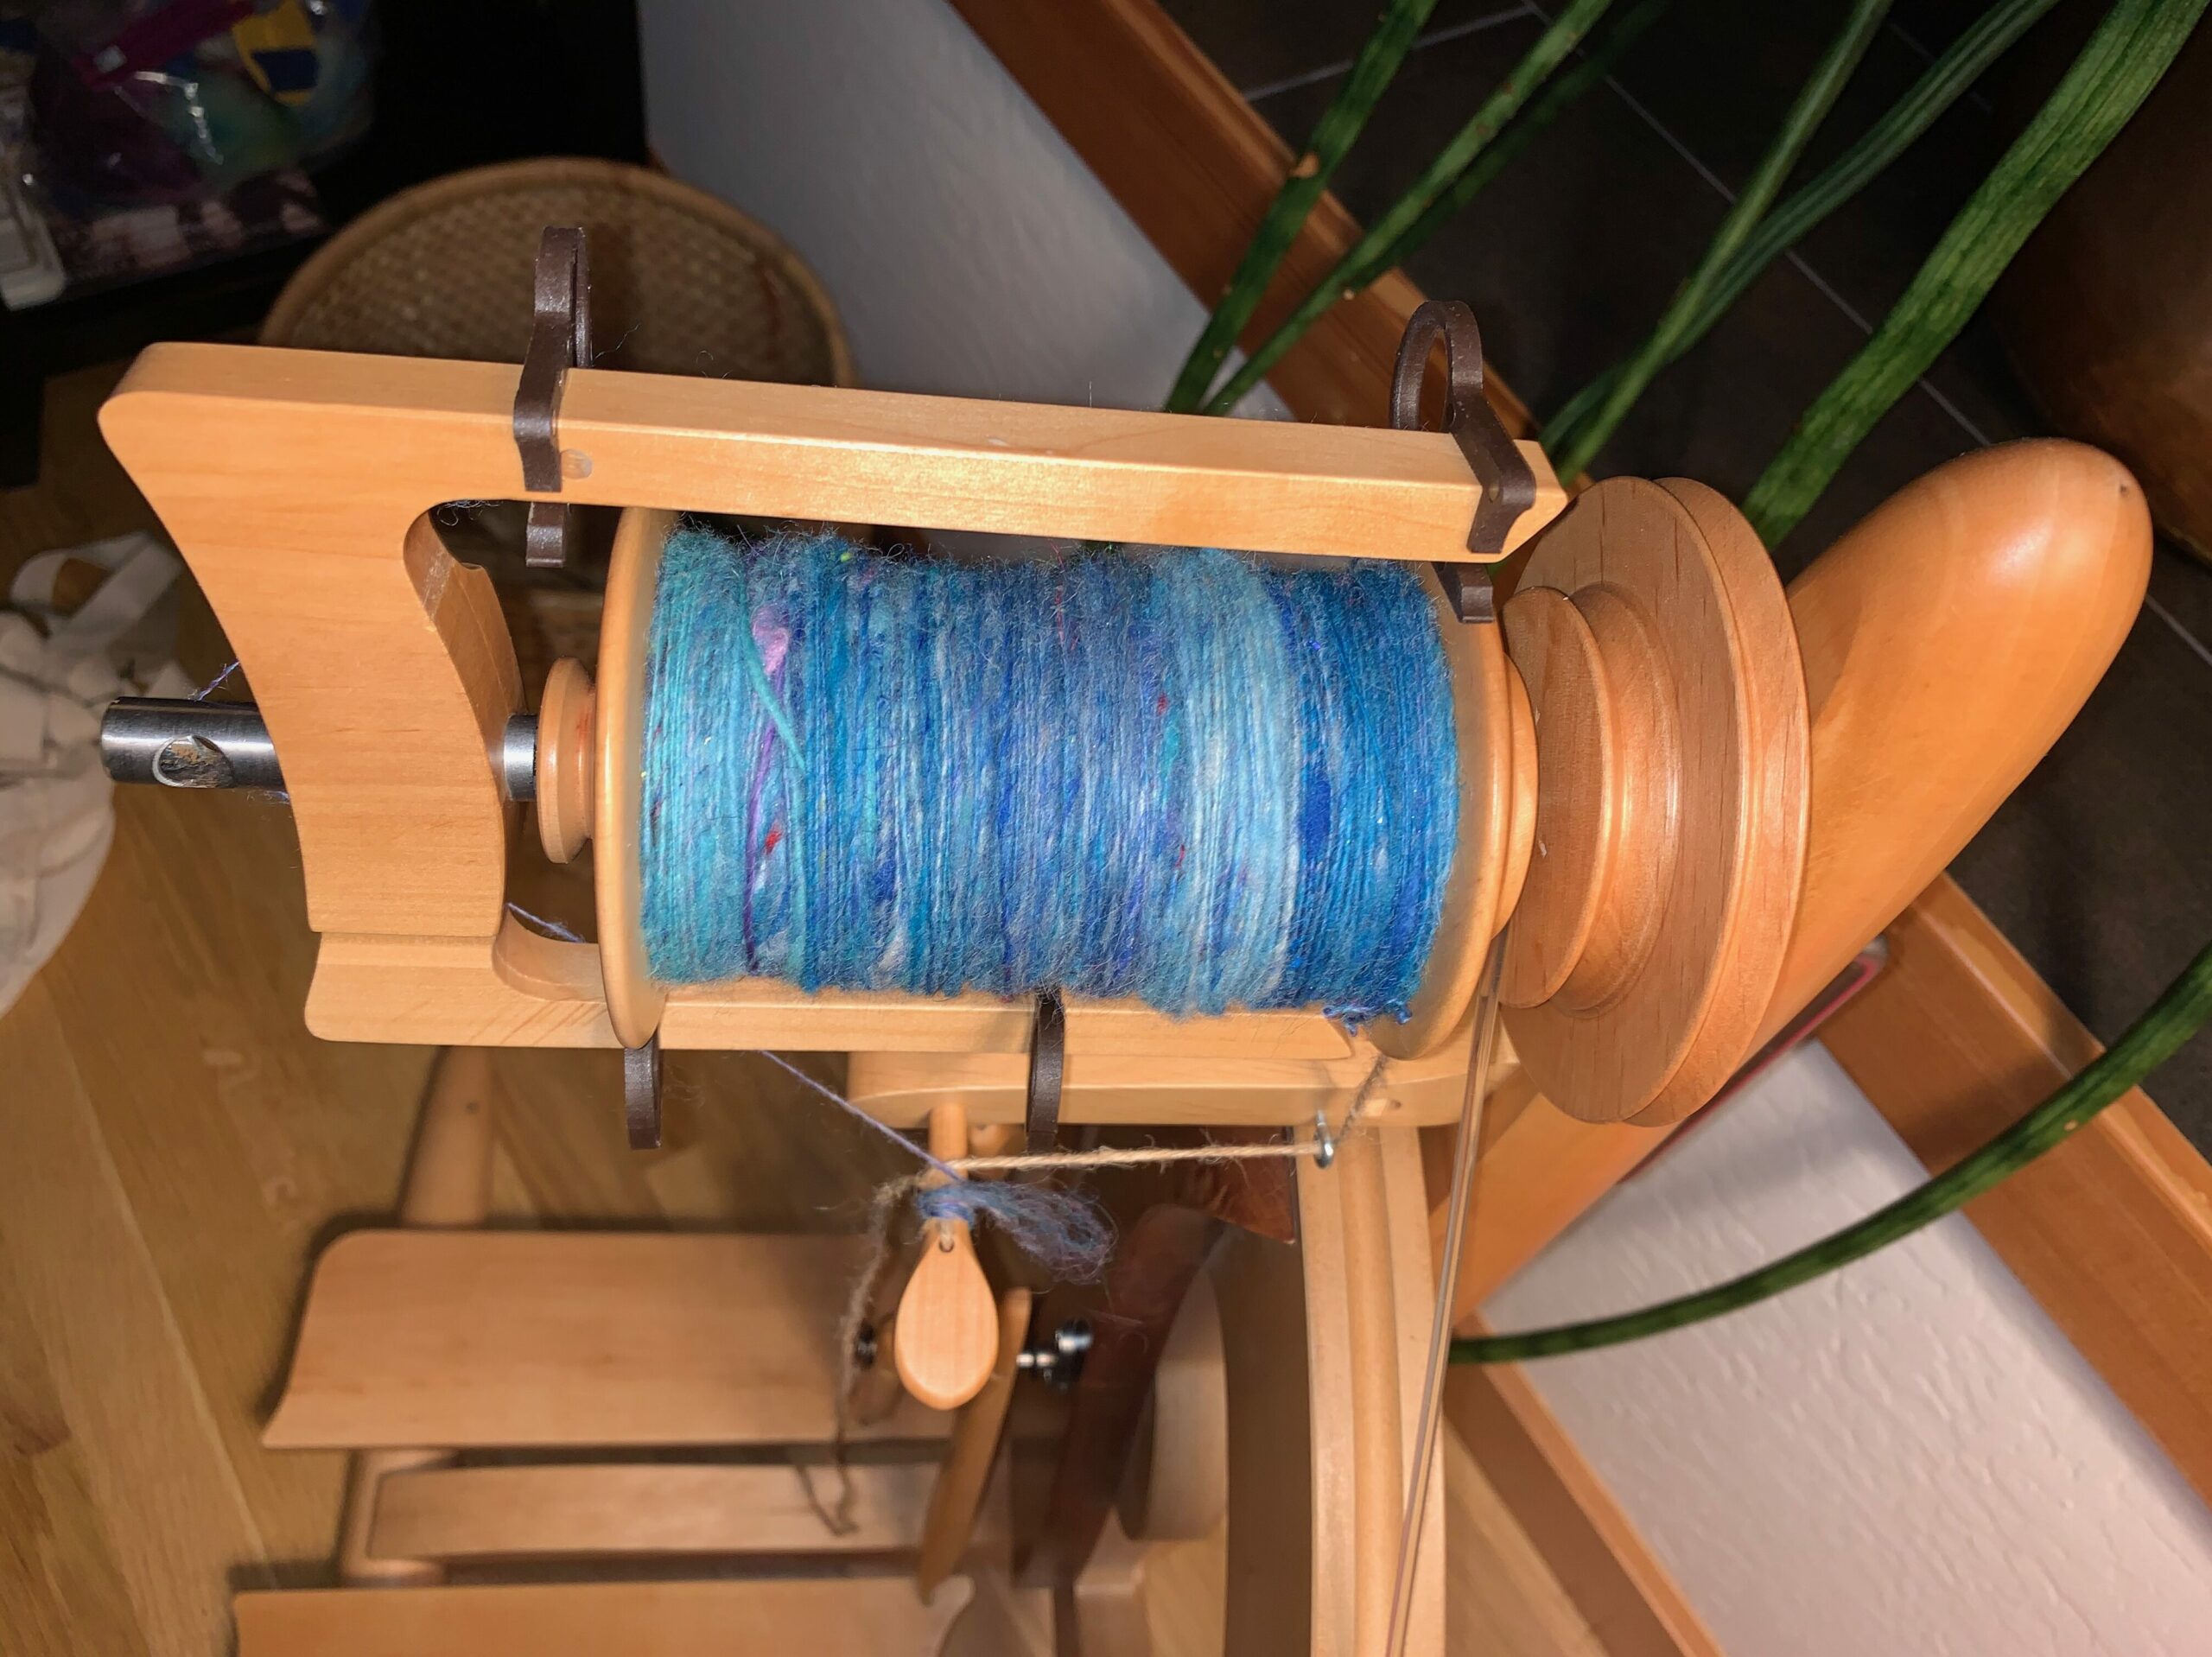 Nearly top-down view of a castle-style spinning wheel with a bobbin mostly full of finely spun singles. The yarn is in shades of blue with hints of purple.